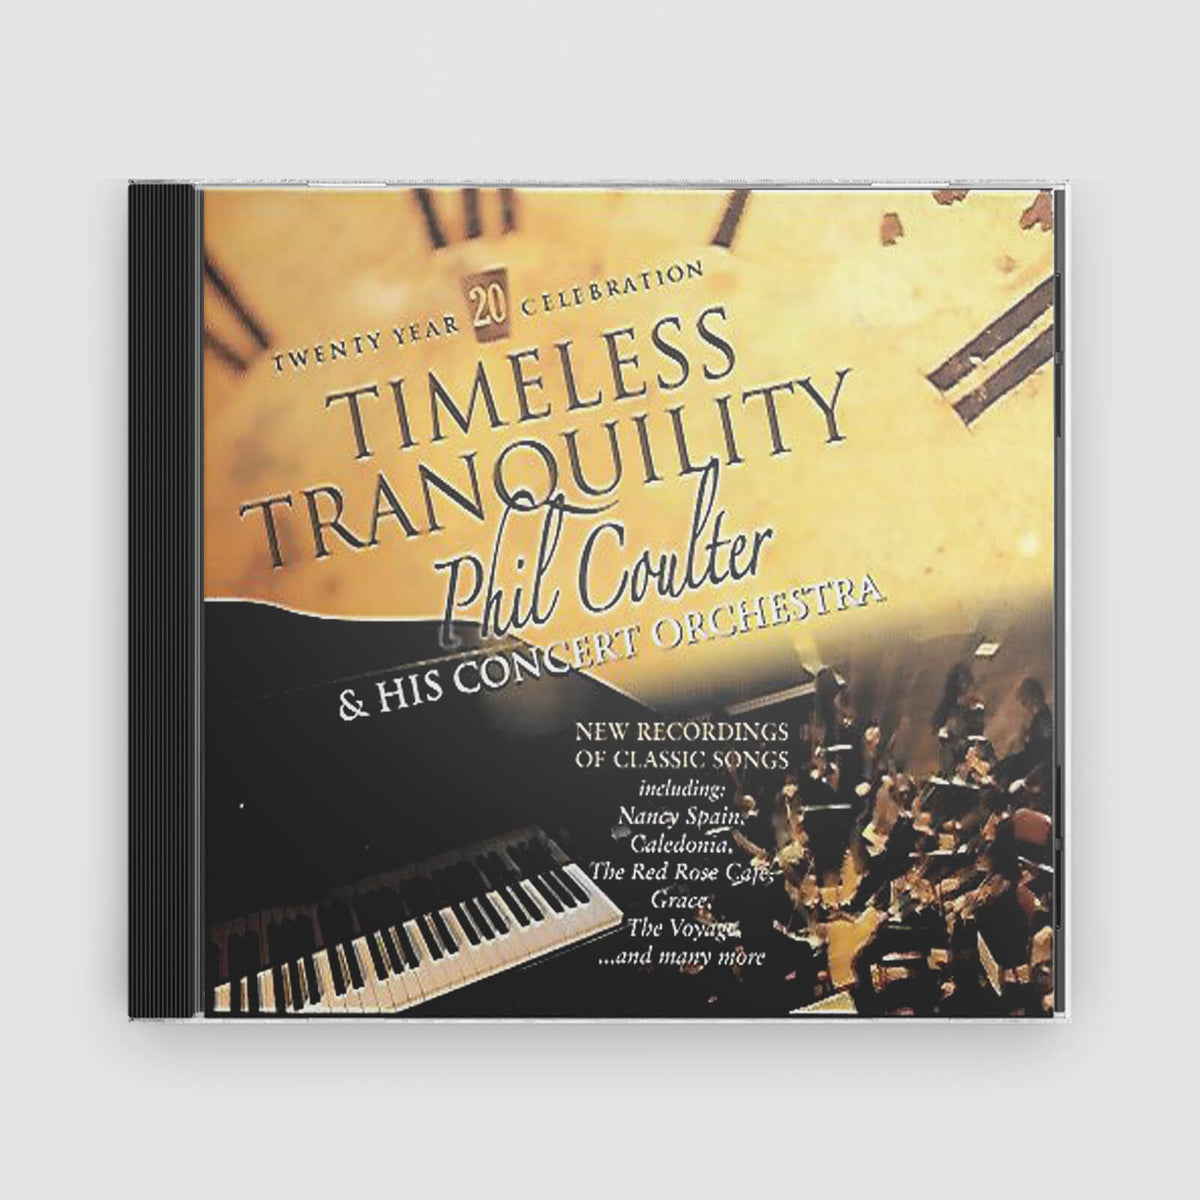 Phil Coulter &amp; His Concert Orchestra : Timeless Tranquility